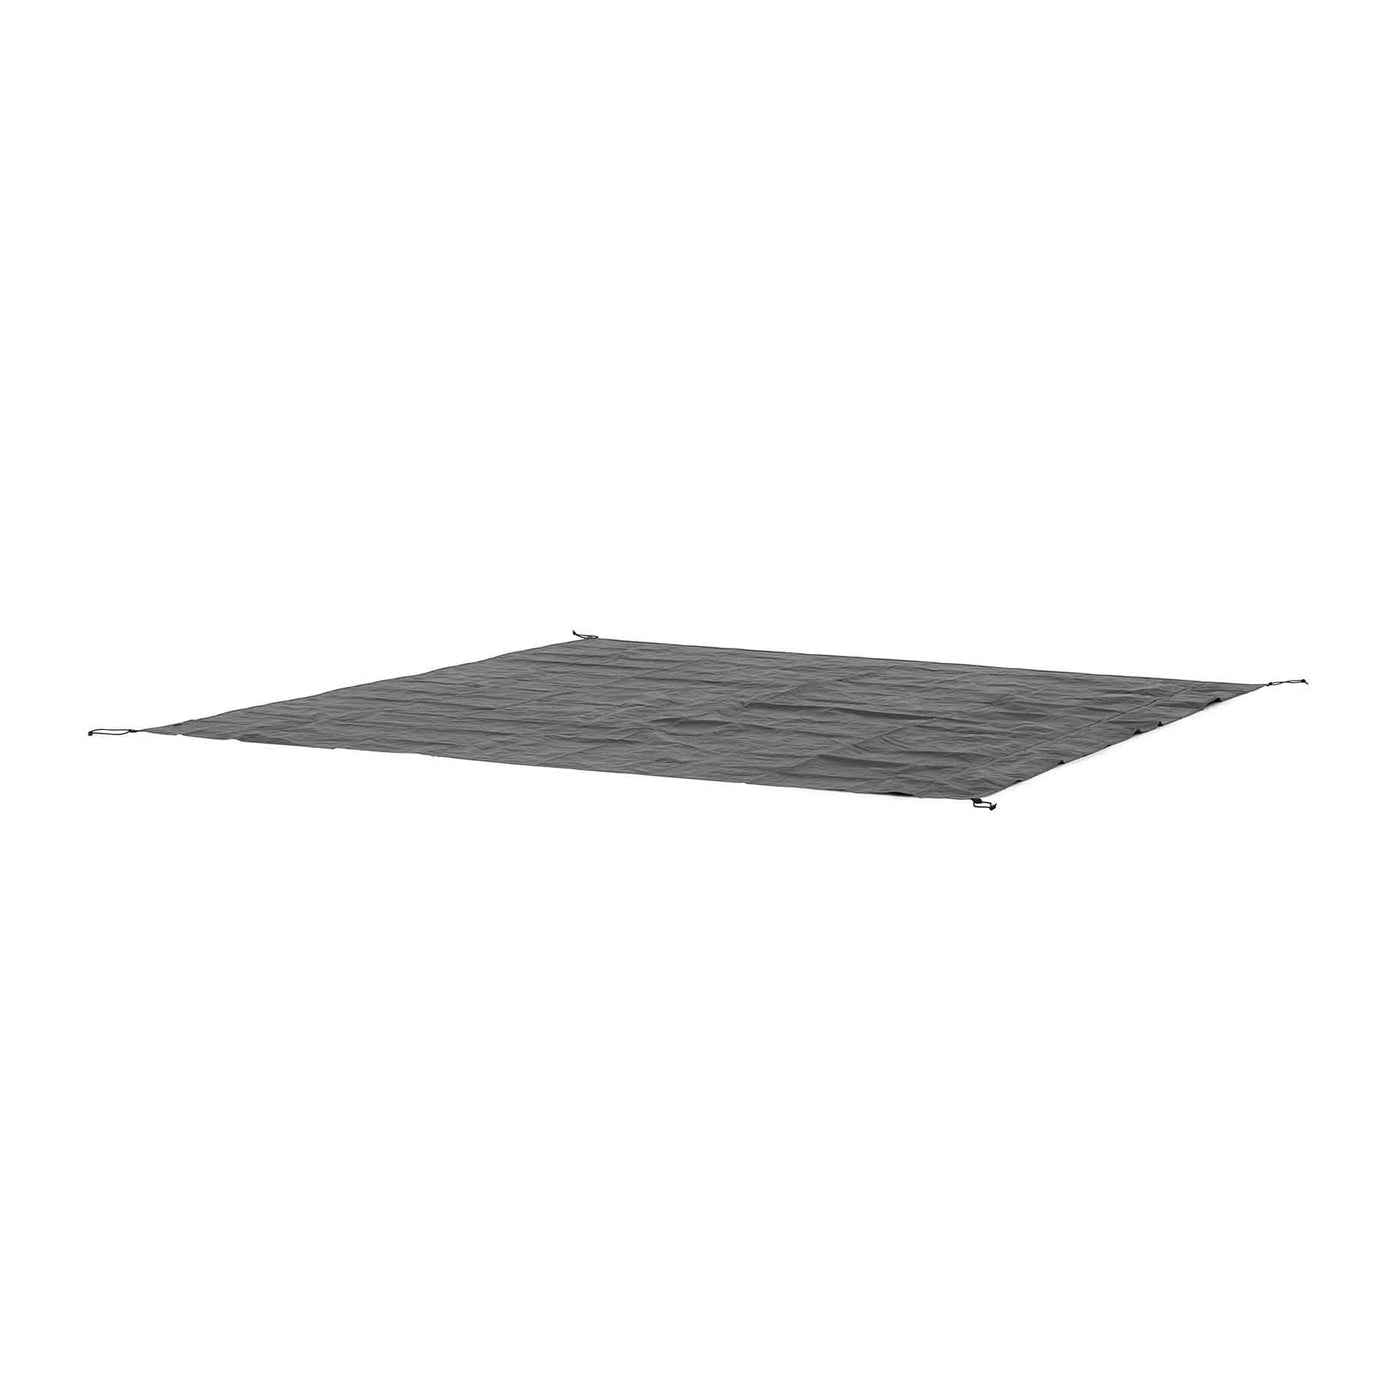 Footprint for 6 Person Tents - 10' x 9'